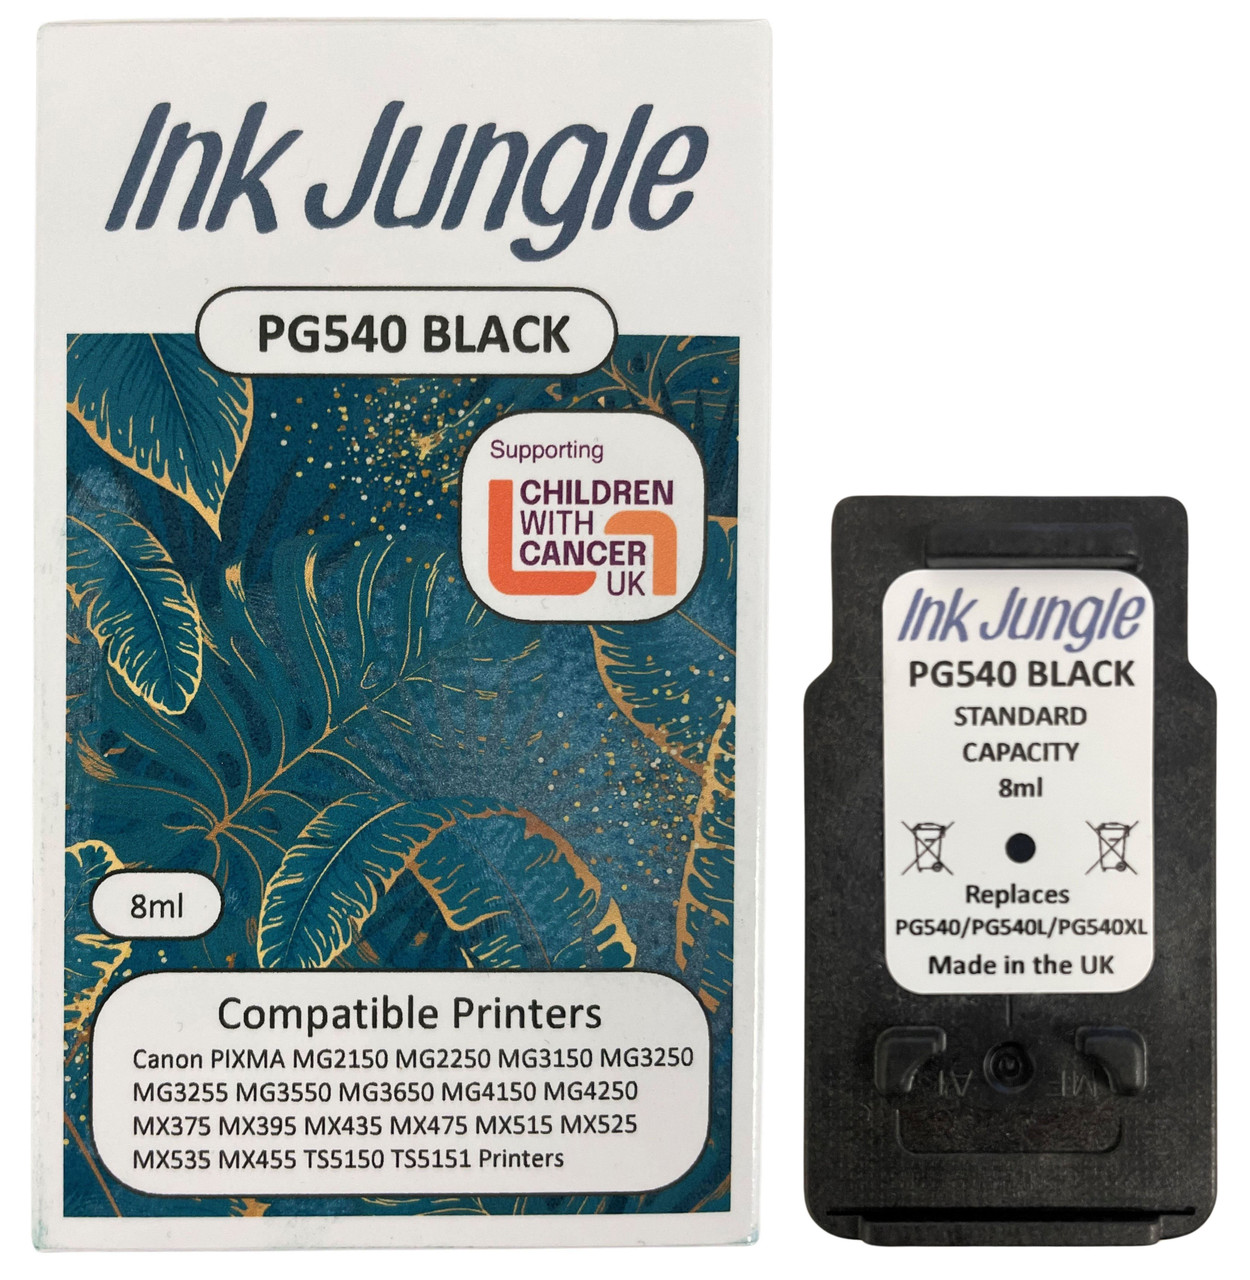 Canon PG540 Black Refilled Ink Cartridge